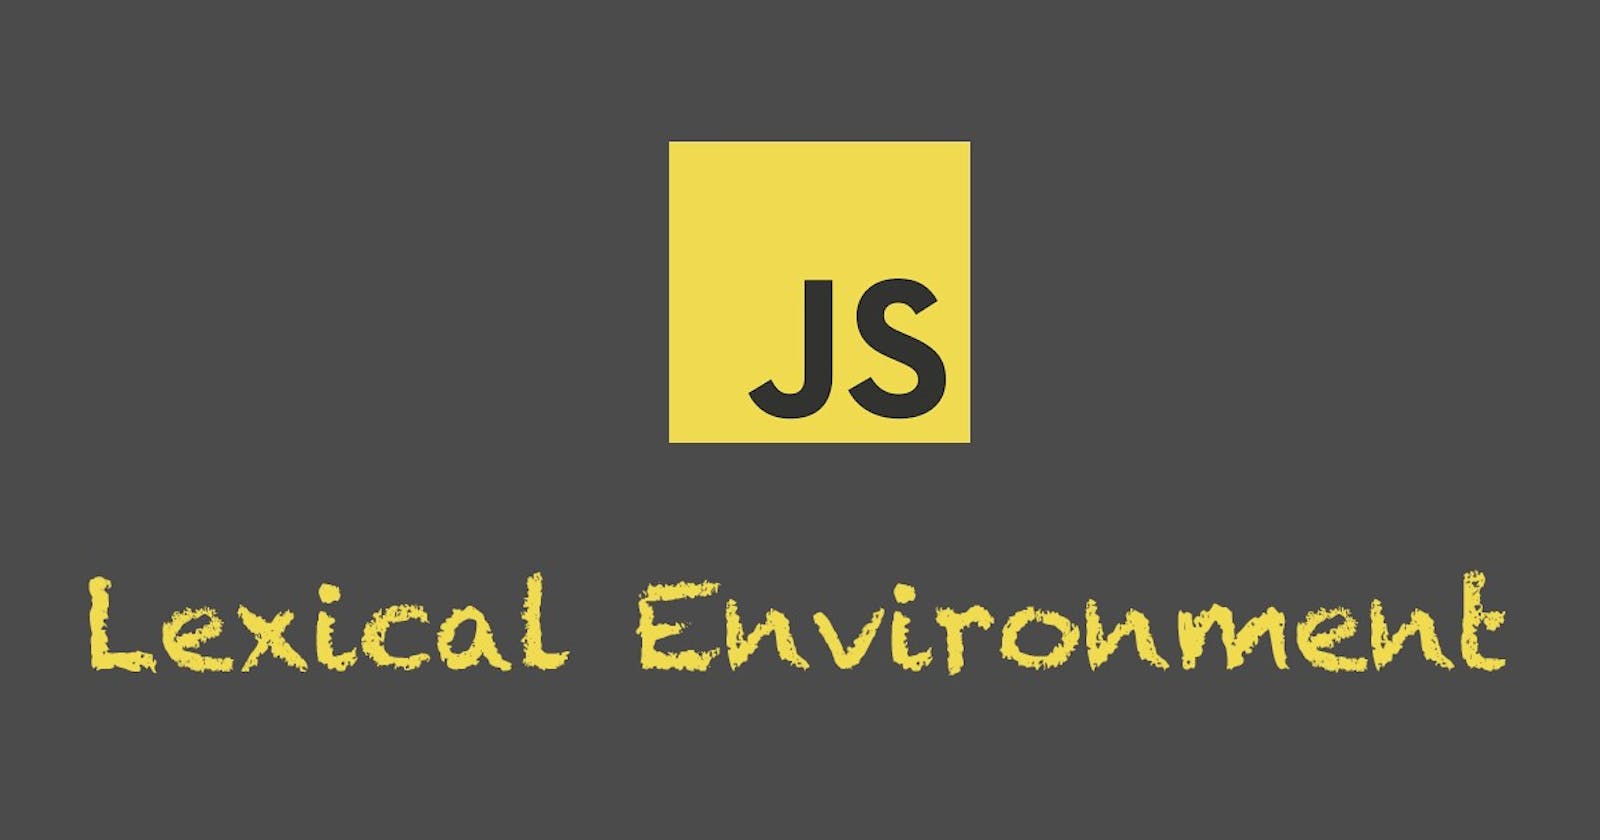 Javascript Placement Series(Part 2)  
Scope, Lexical Environment, Scope Chaining